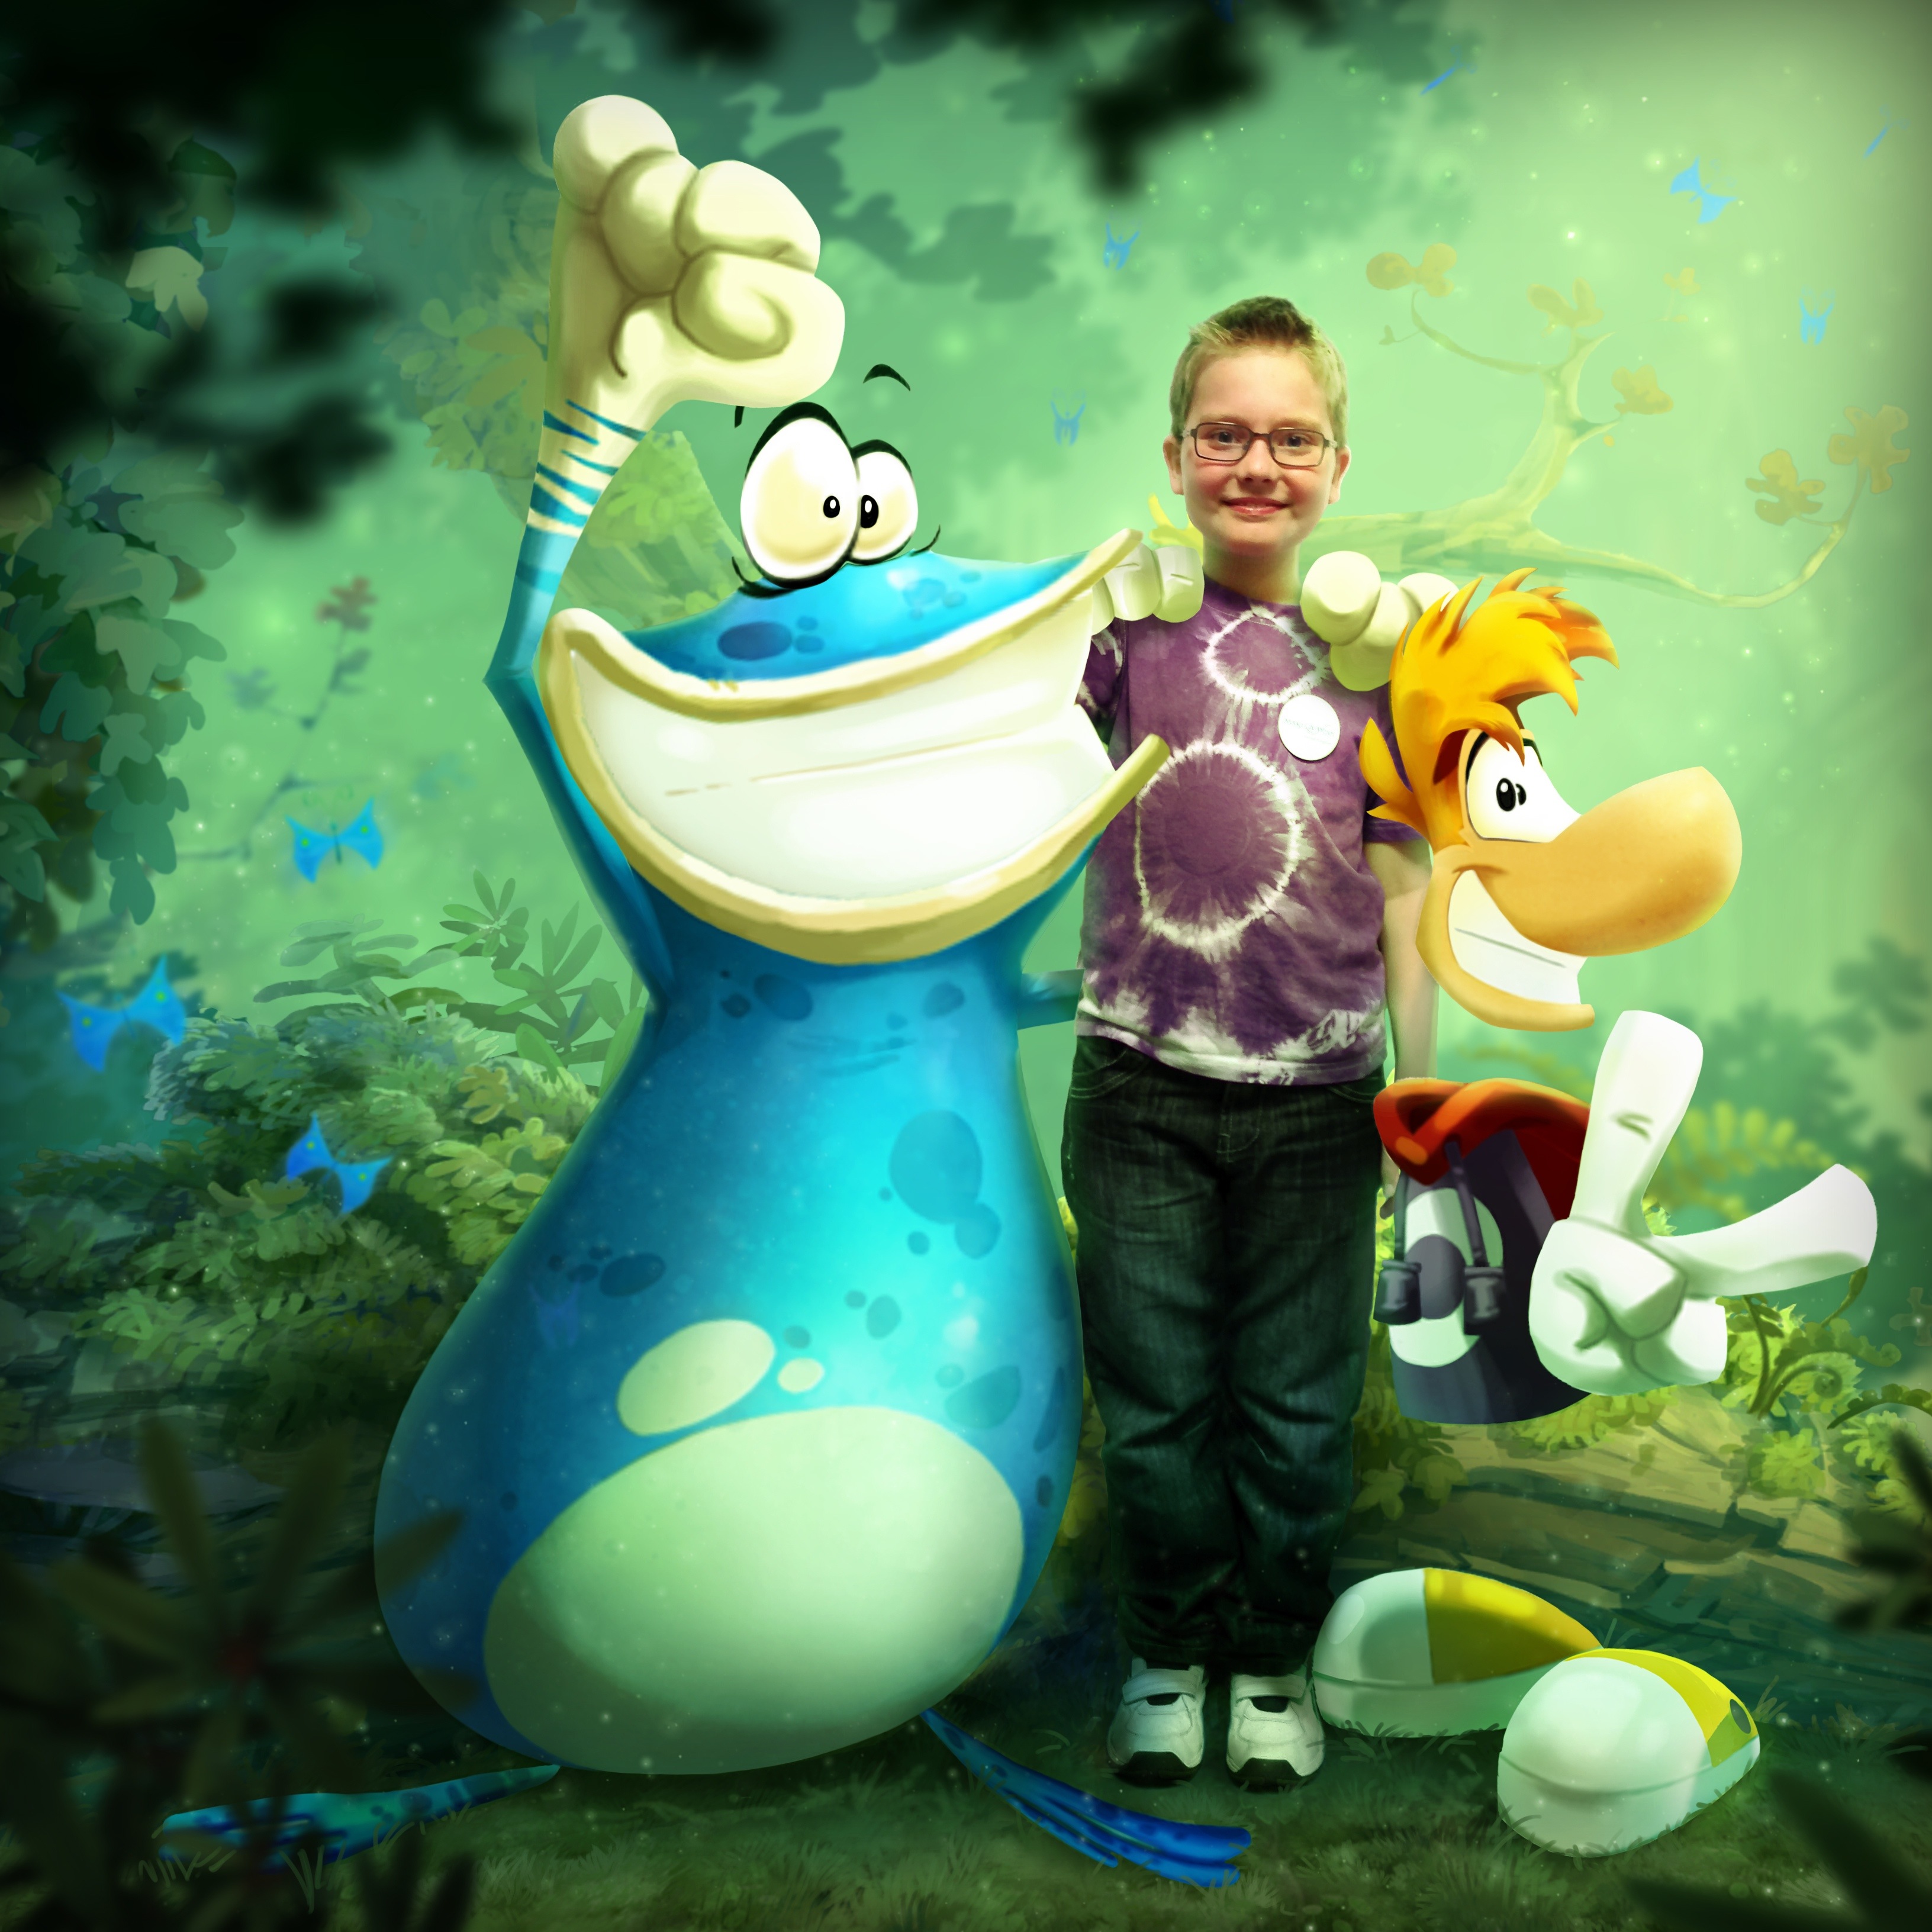 Look at me with Rayman and Globox in legends! 